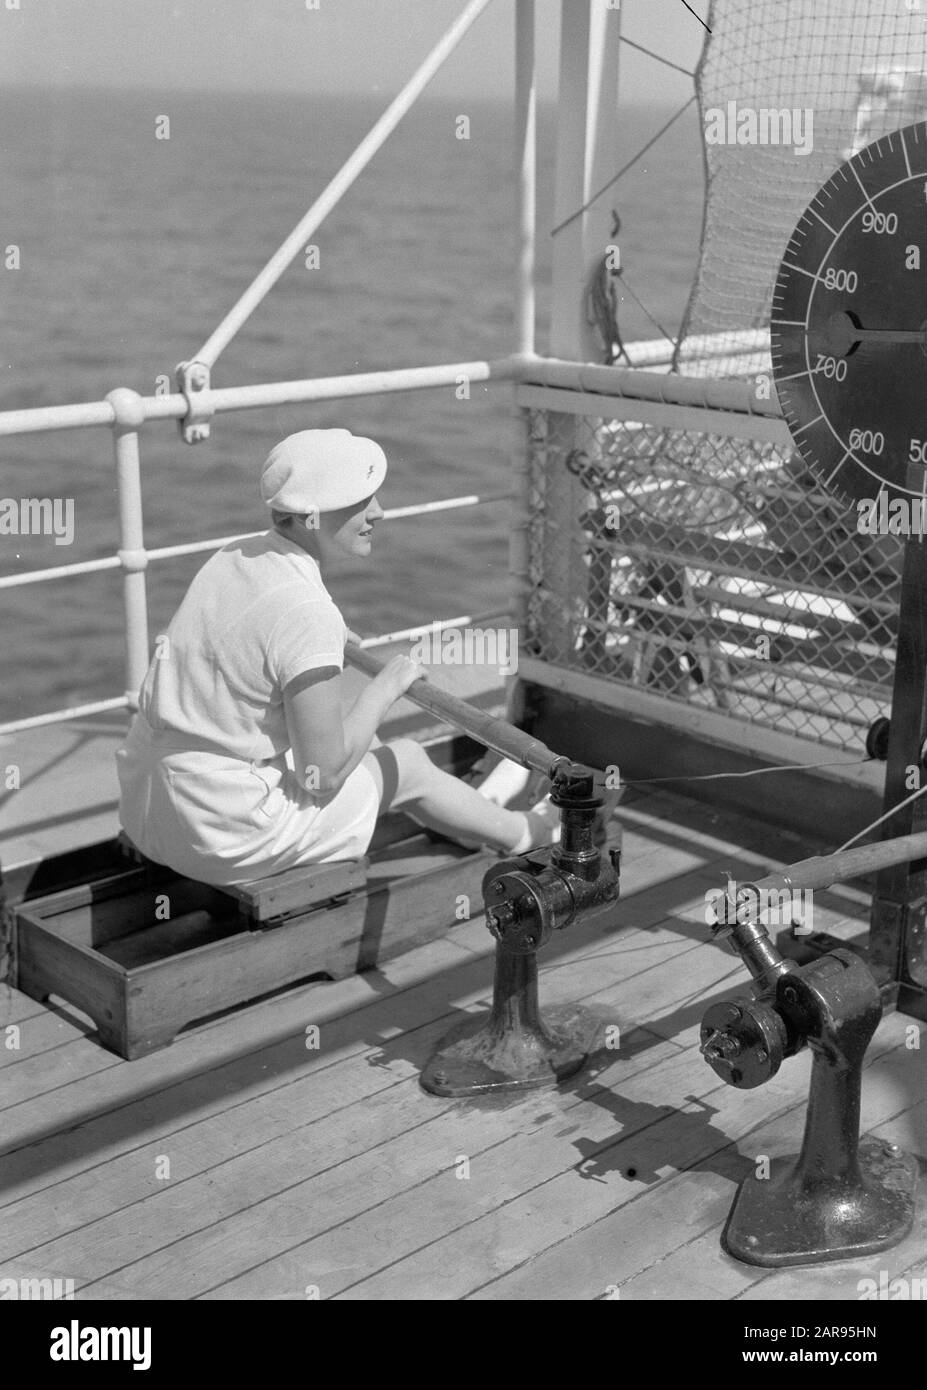 MS Colombia  From the Polls woman Nell Langlais to a rowing machine on the cruise ship MS Colombia on the way to Madeira Date: 1934 Keywords: ships Personname: Langlais, Nell Institution name: KNSM Stock Photo